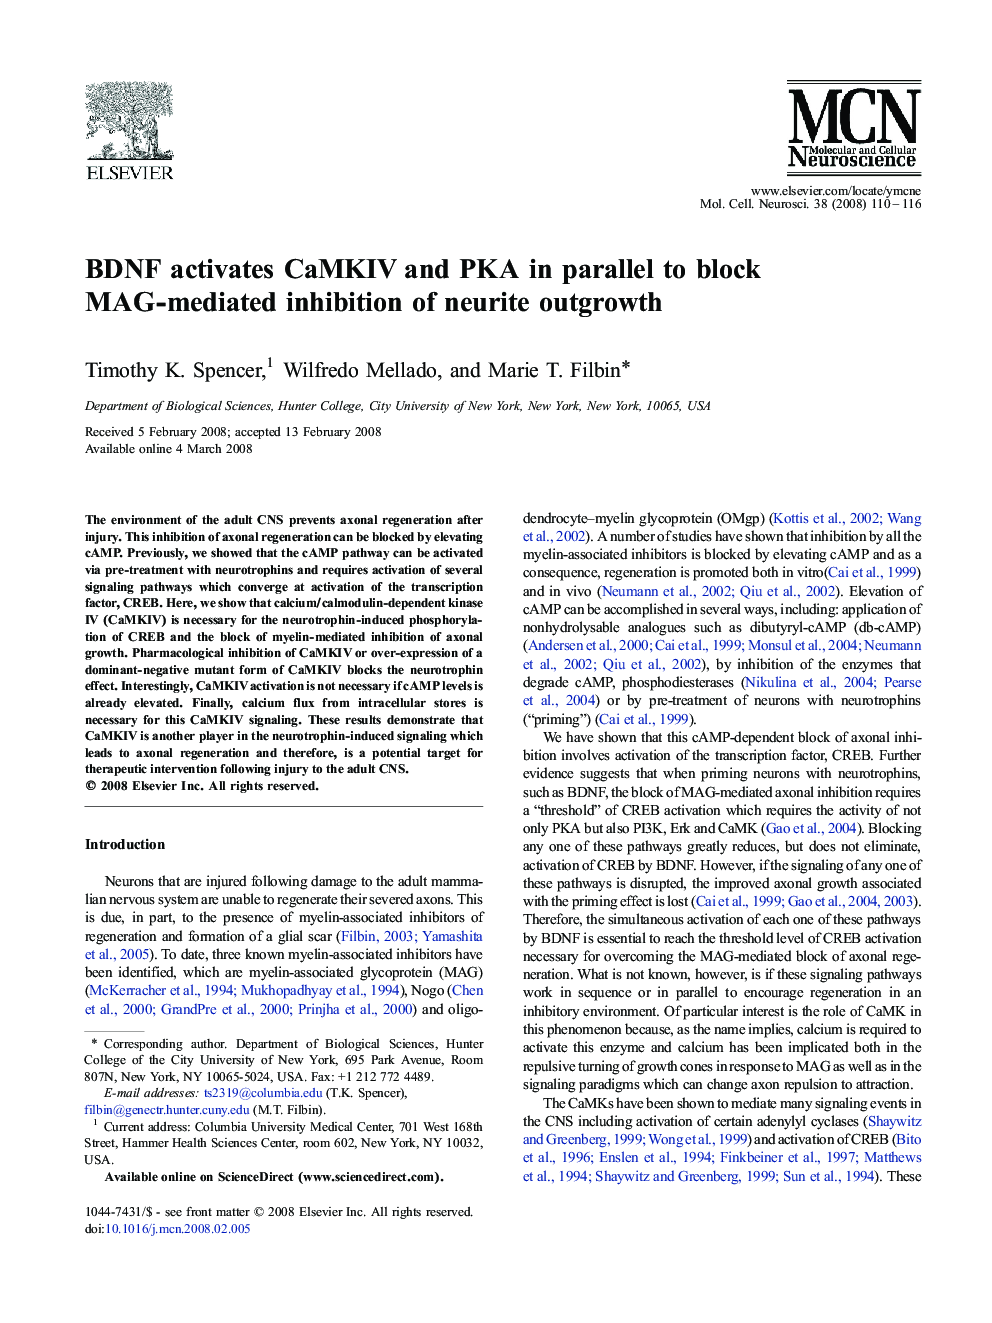 BDNF activates CaMKIV and PKA in parallel to block MAG-mediated inhibition of neurite outgrowth